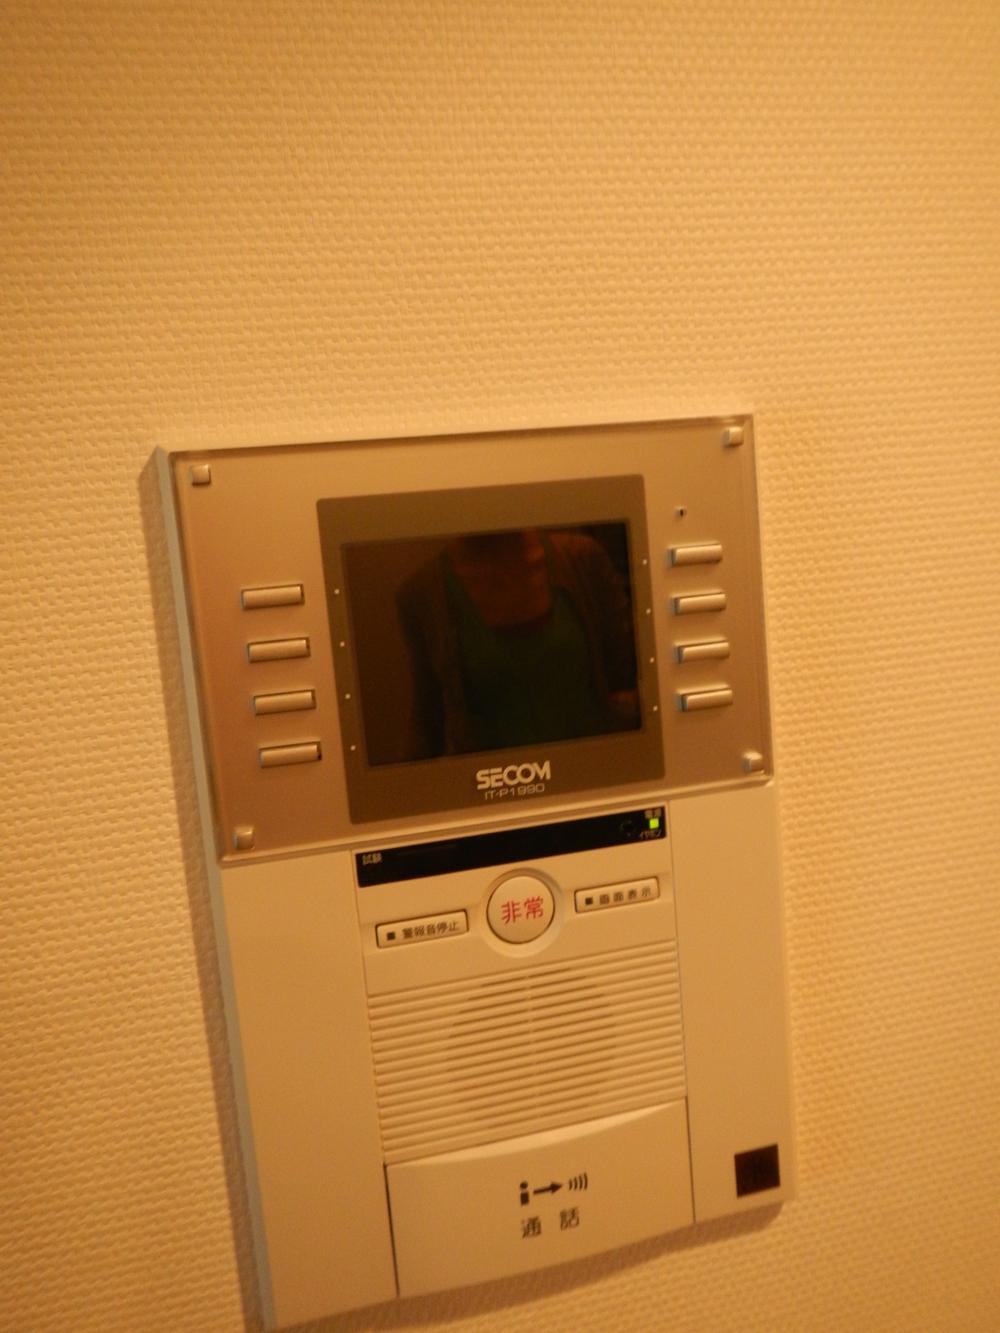 Other introspection. With TV monitor intercom